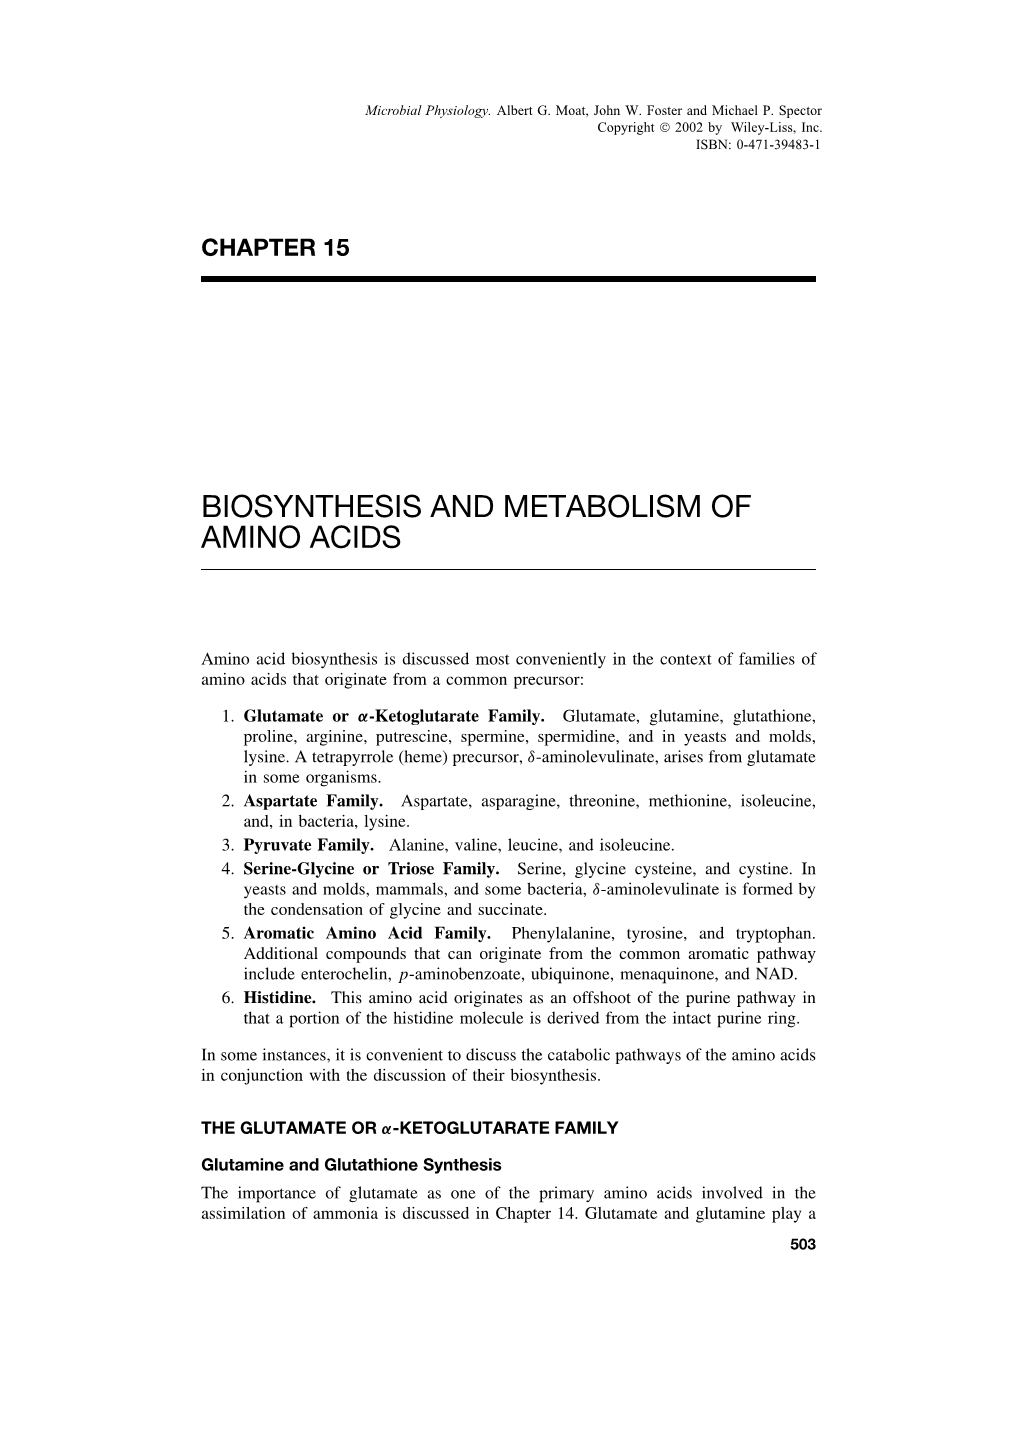 "Biosynthesis and Metabolism of Amino Acids". In: Microbial Physiology